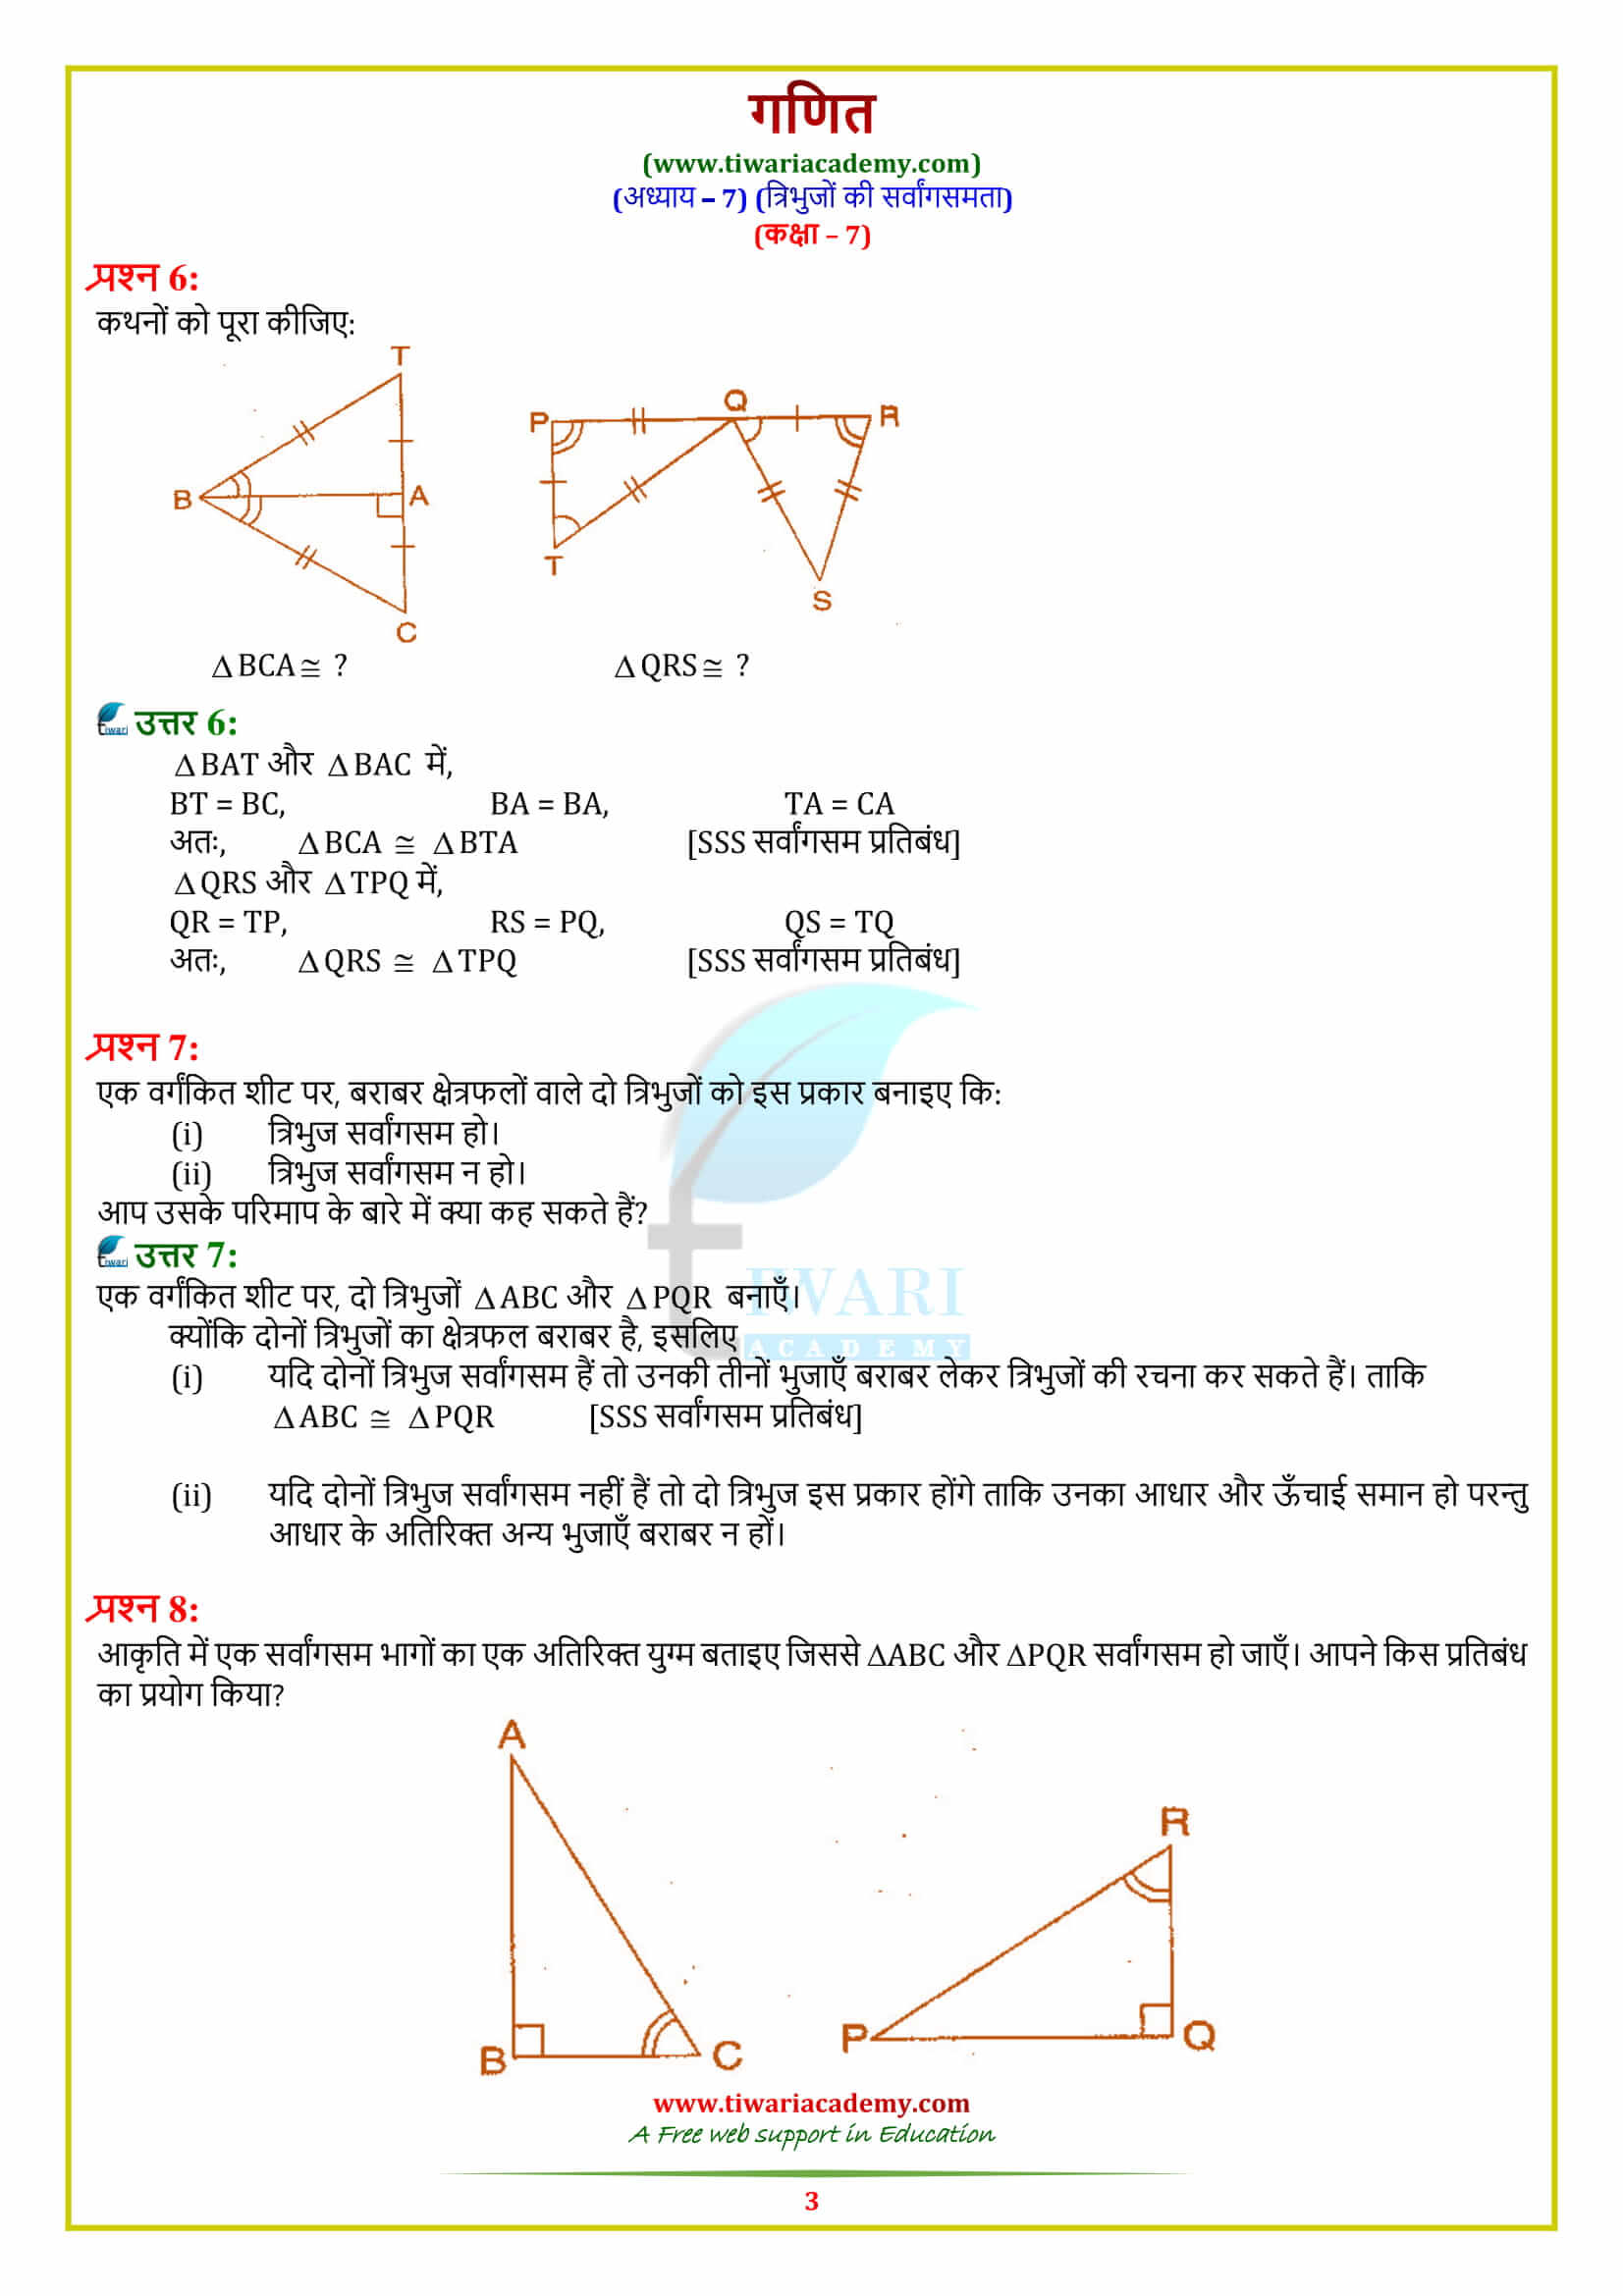 7 Maths Chapter 7 Exercise 7.2 free guide in hindi